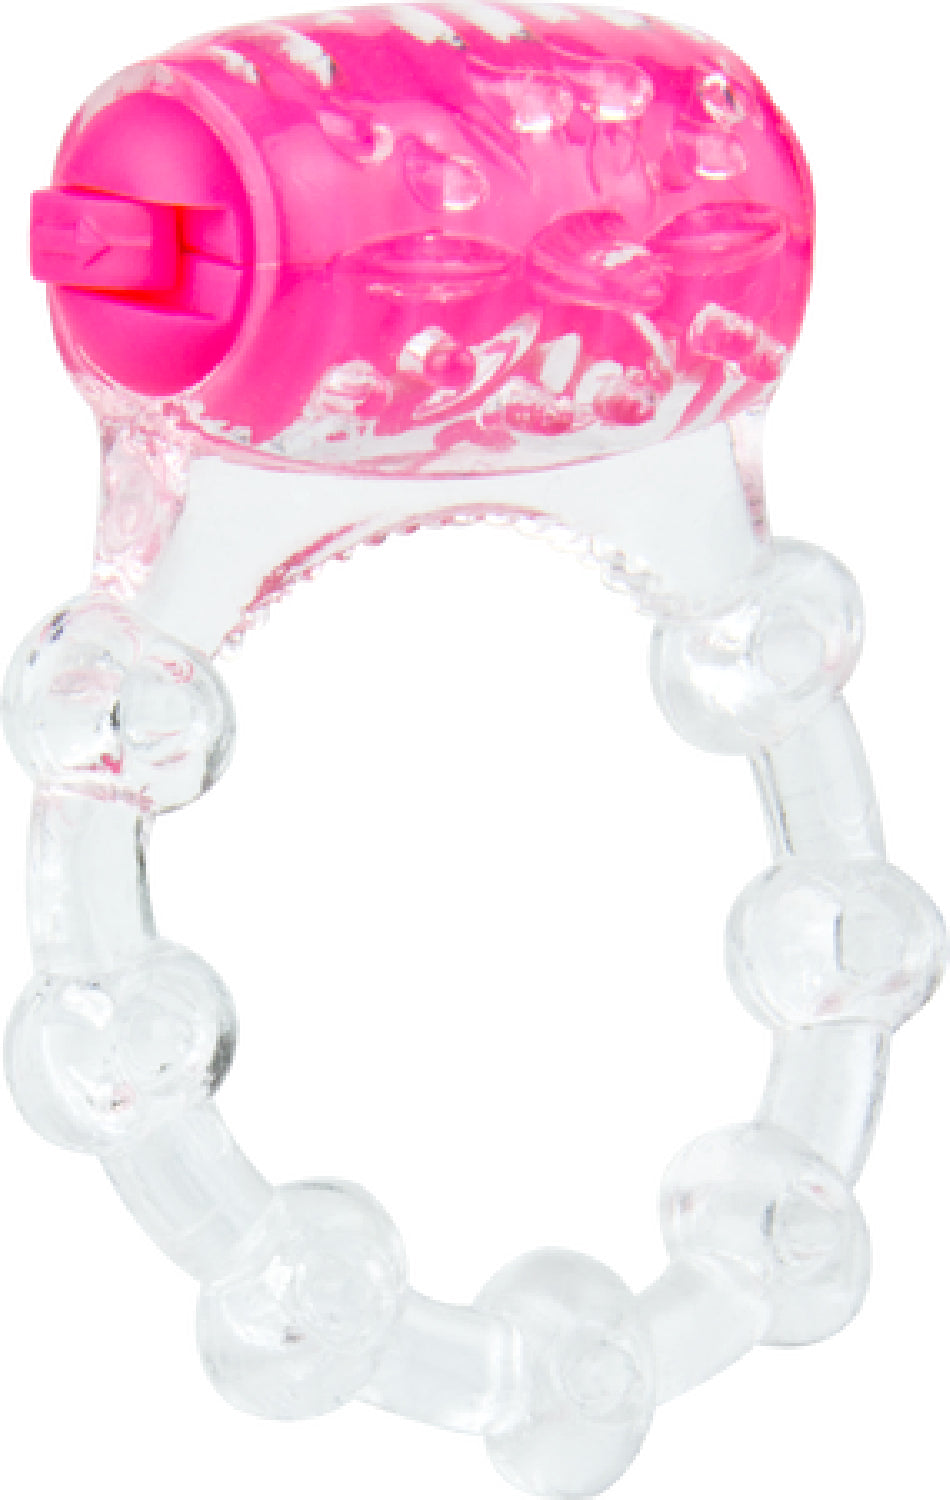 ColorPoP Quickie Vibrating Ring - Pink